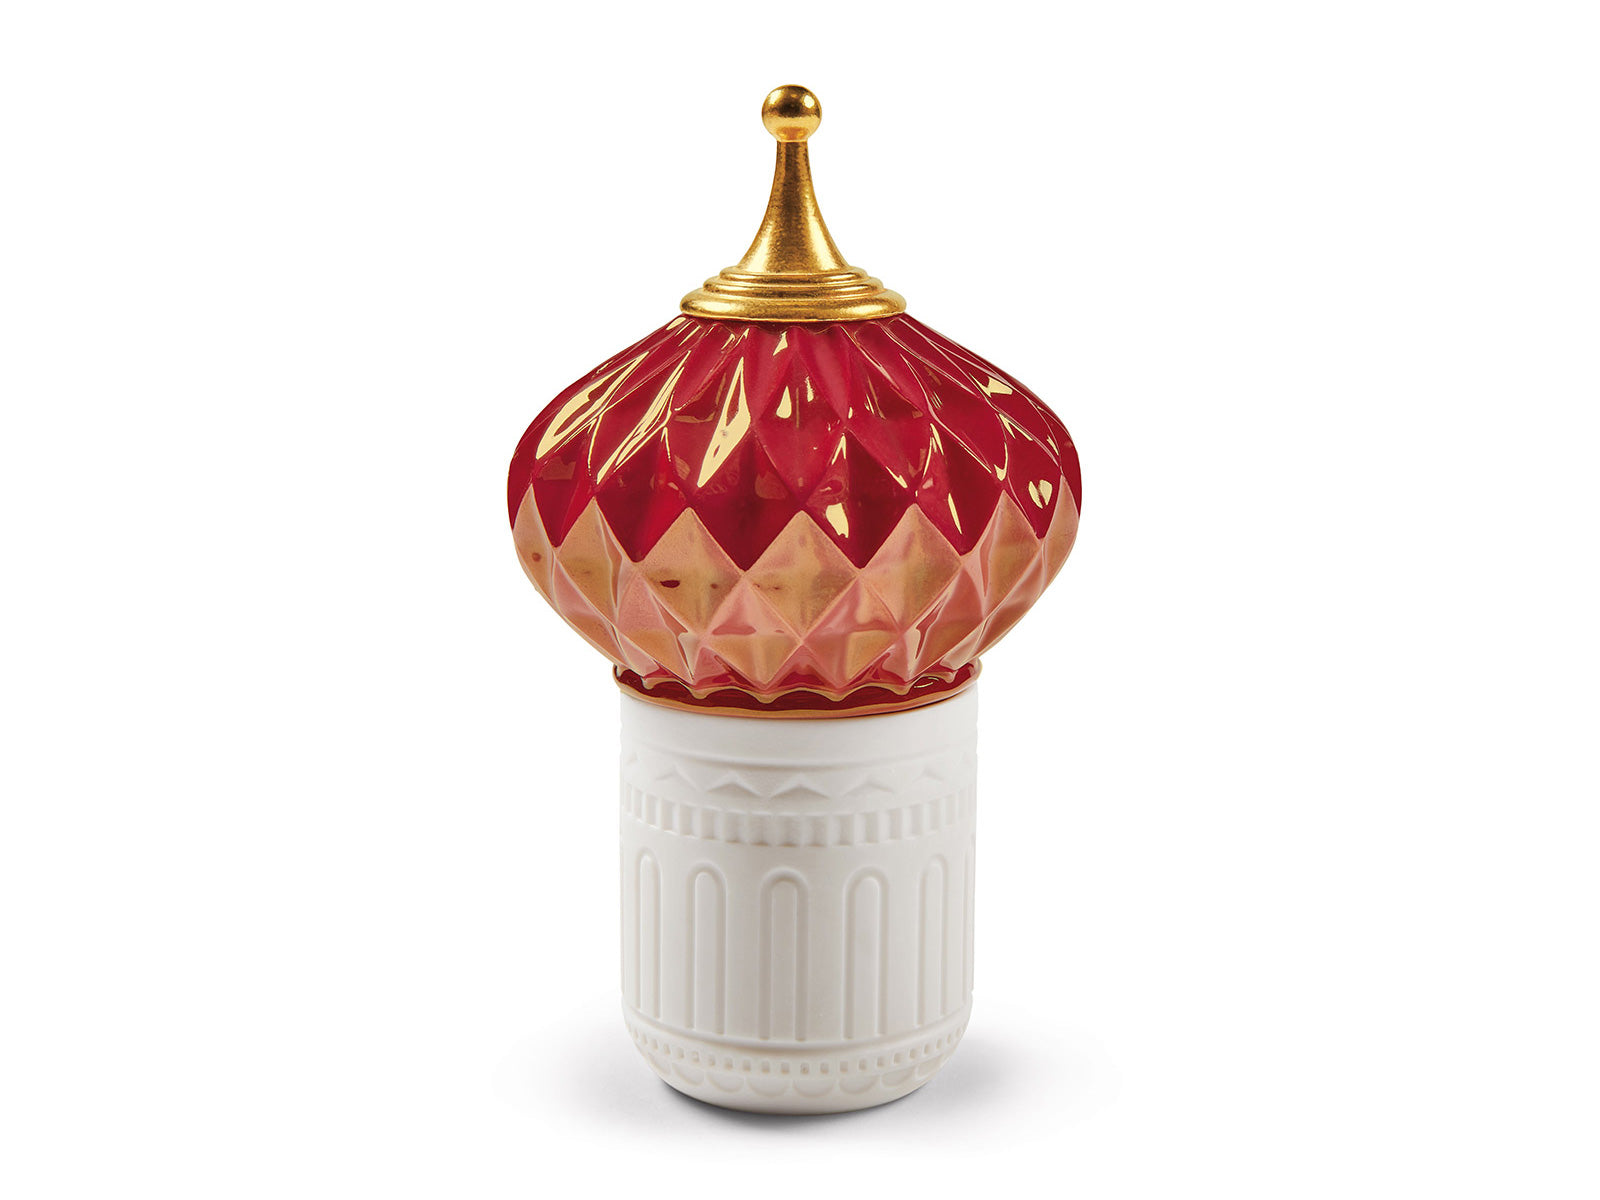 Lladro Spire Candle 1001 Lights 01040169